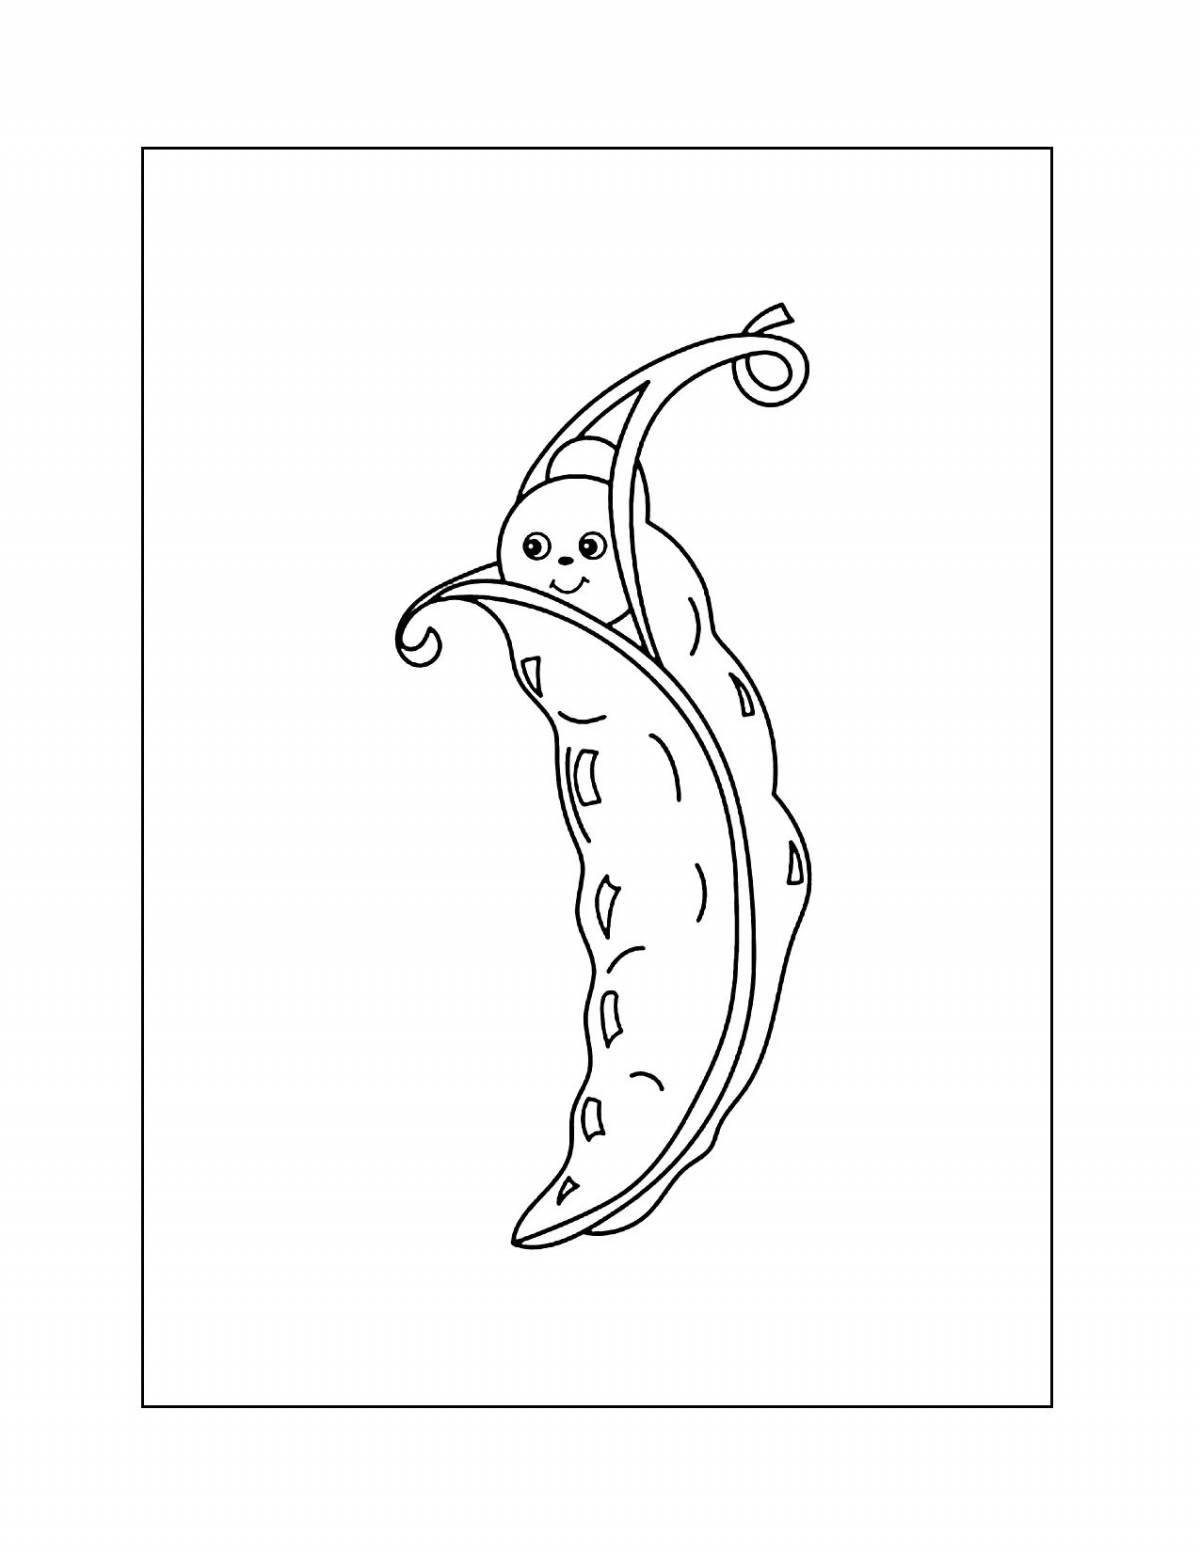 Animated pea coloring page for tykes